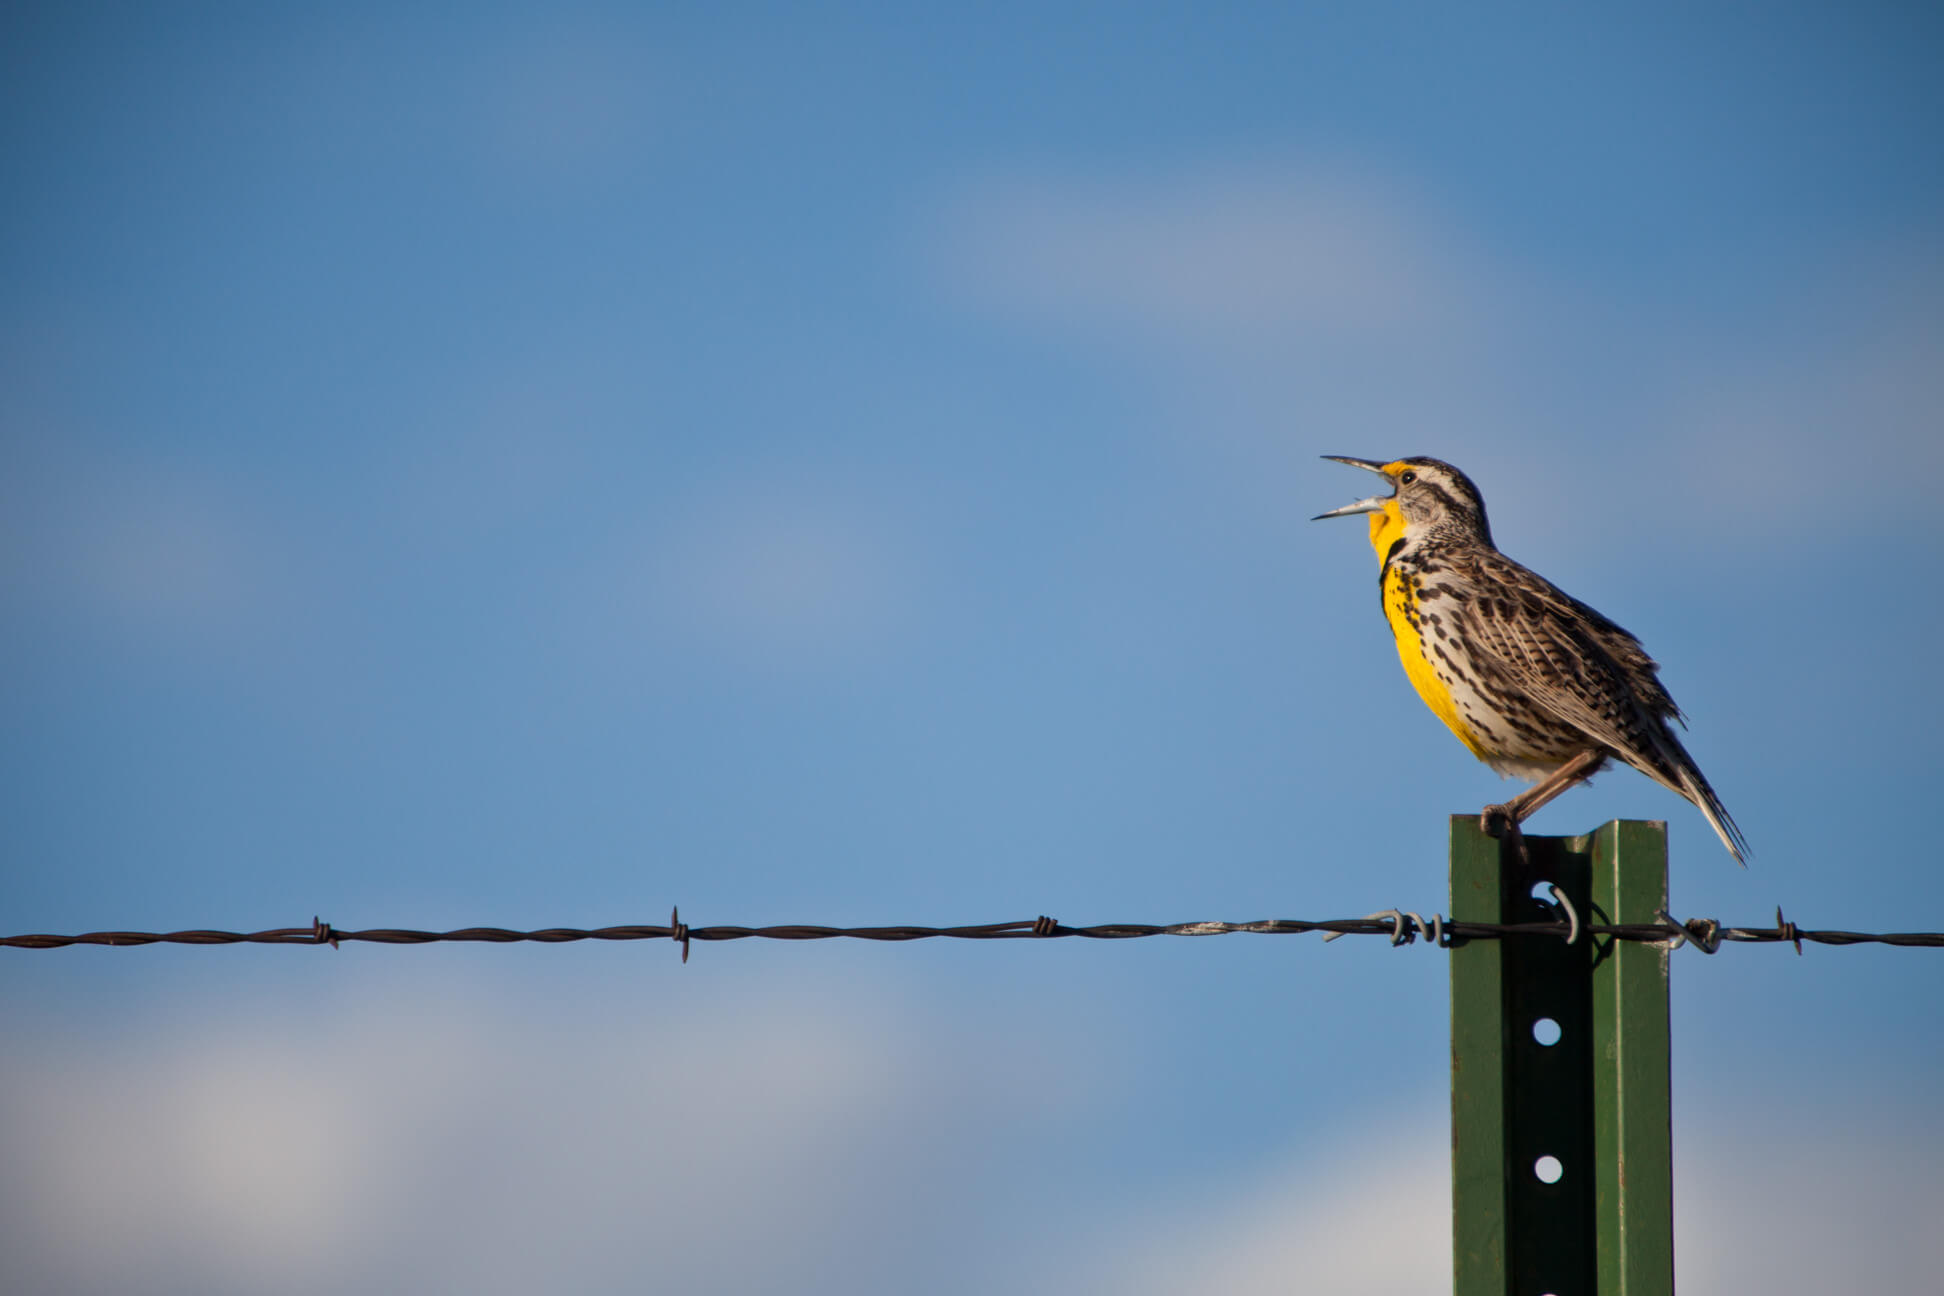 A meadowlark sings its tune while sitting on barbed wire at the National Bison Range in Montana